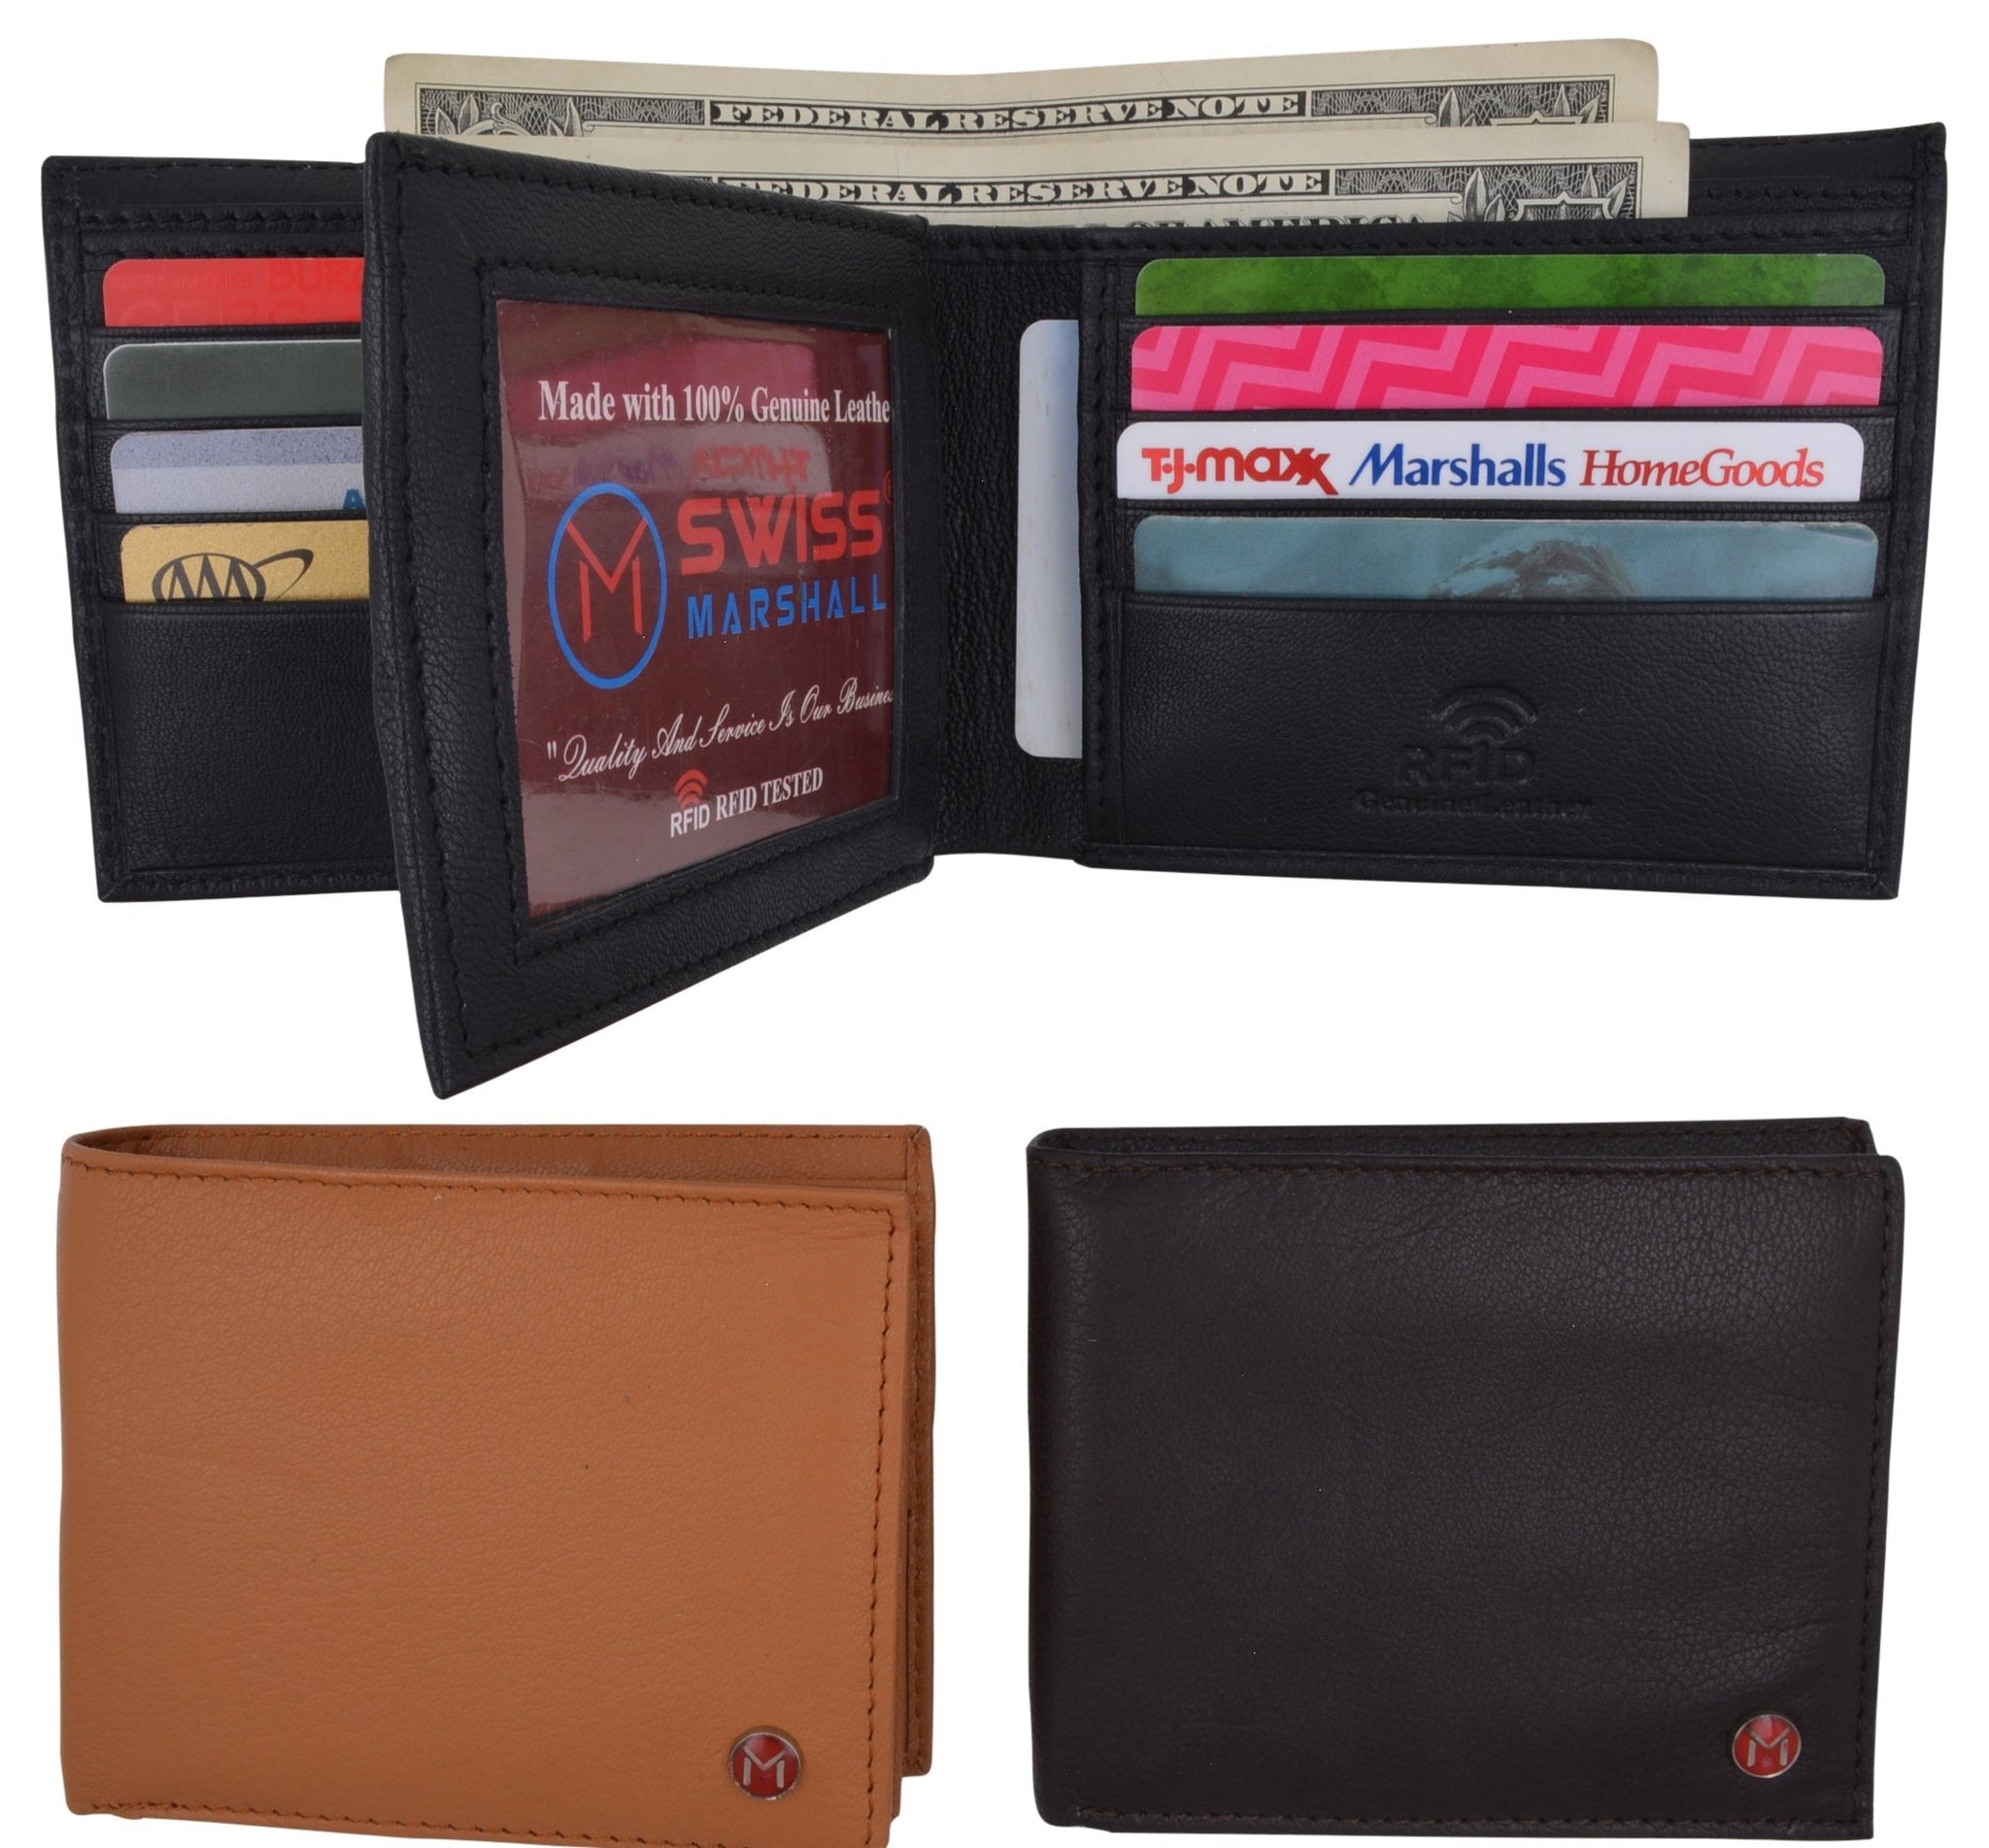 RICHPORTS Checkered Leather Wallets for Men with RFID Blocking